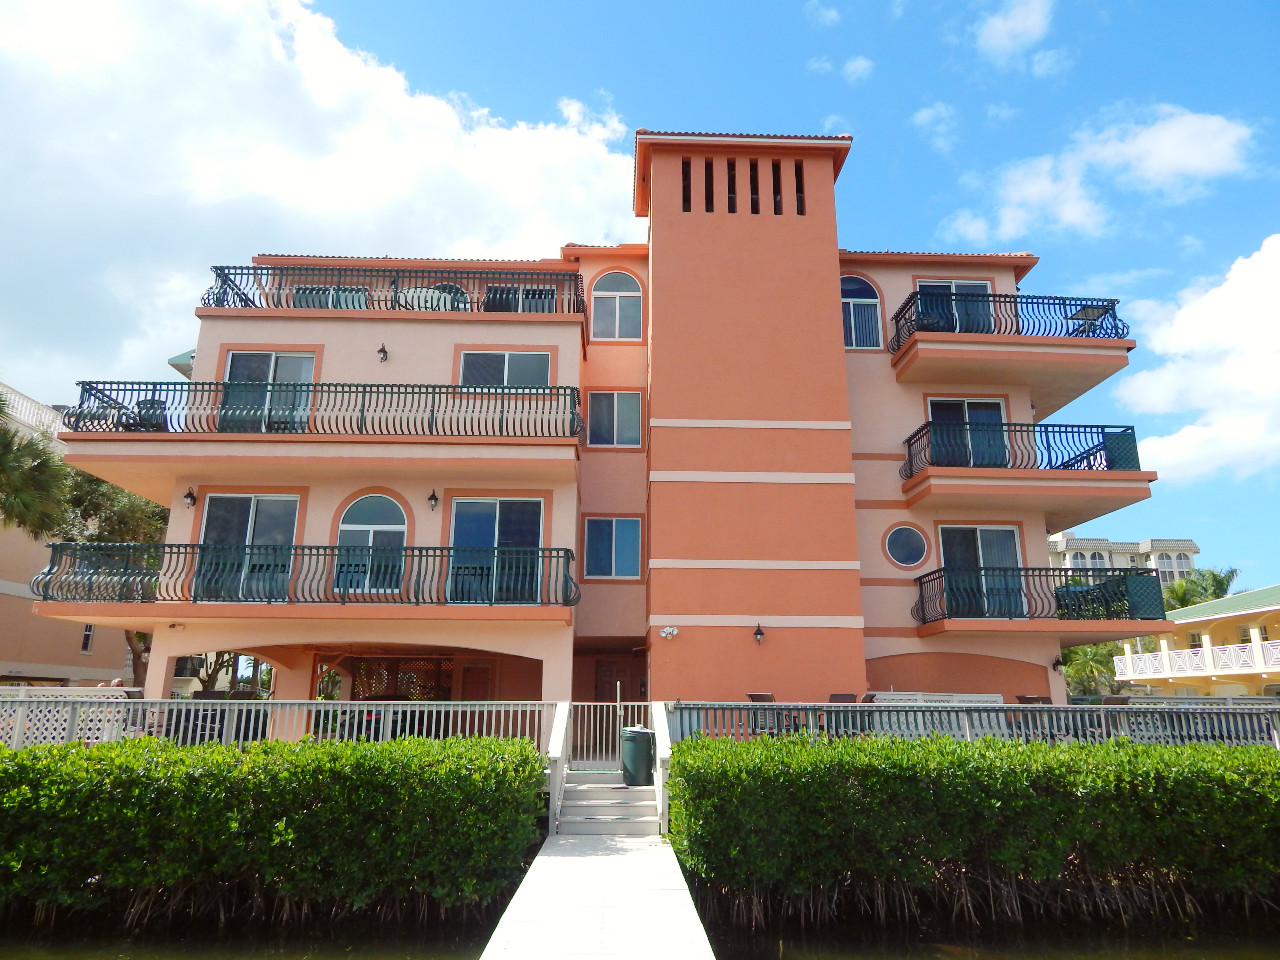 House with balcony in Naples on the Bay